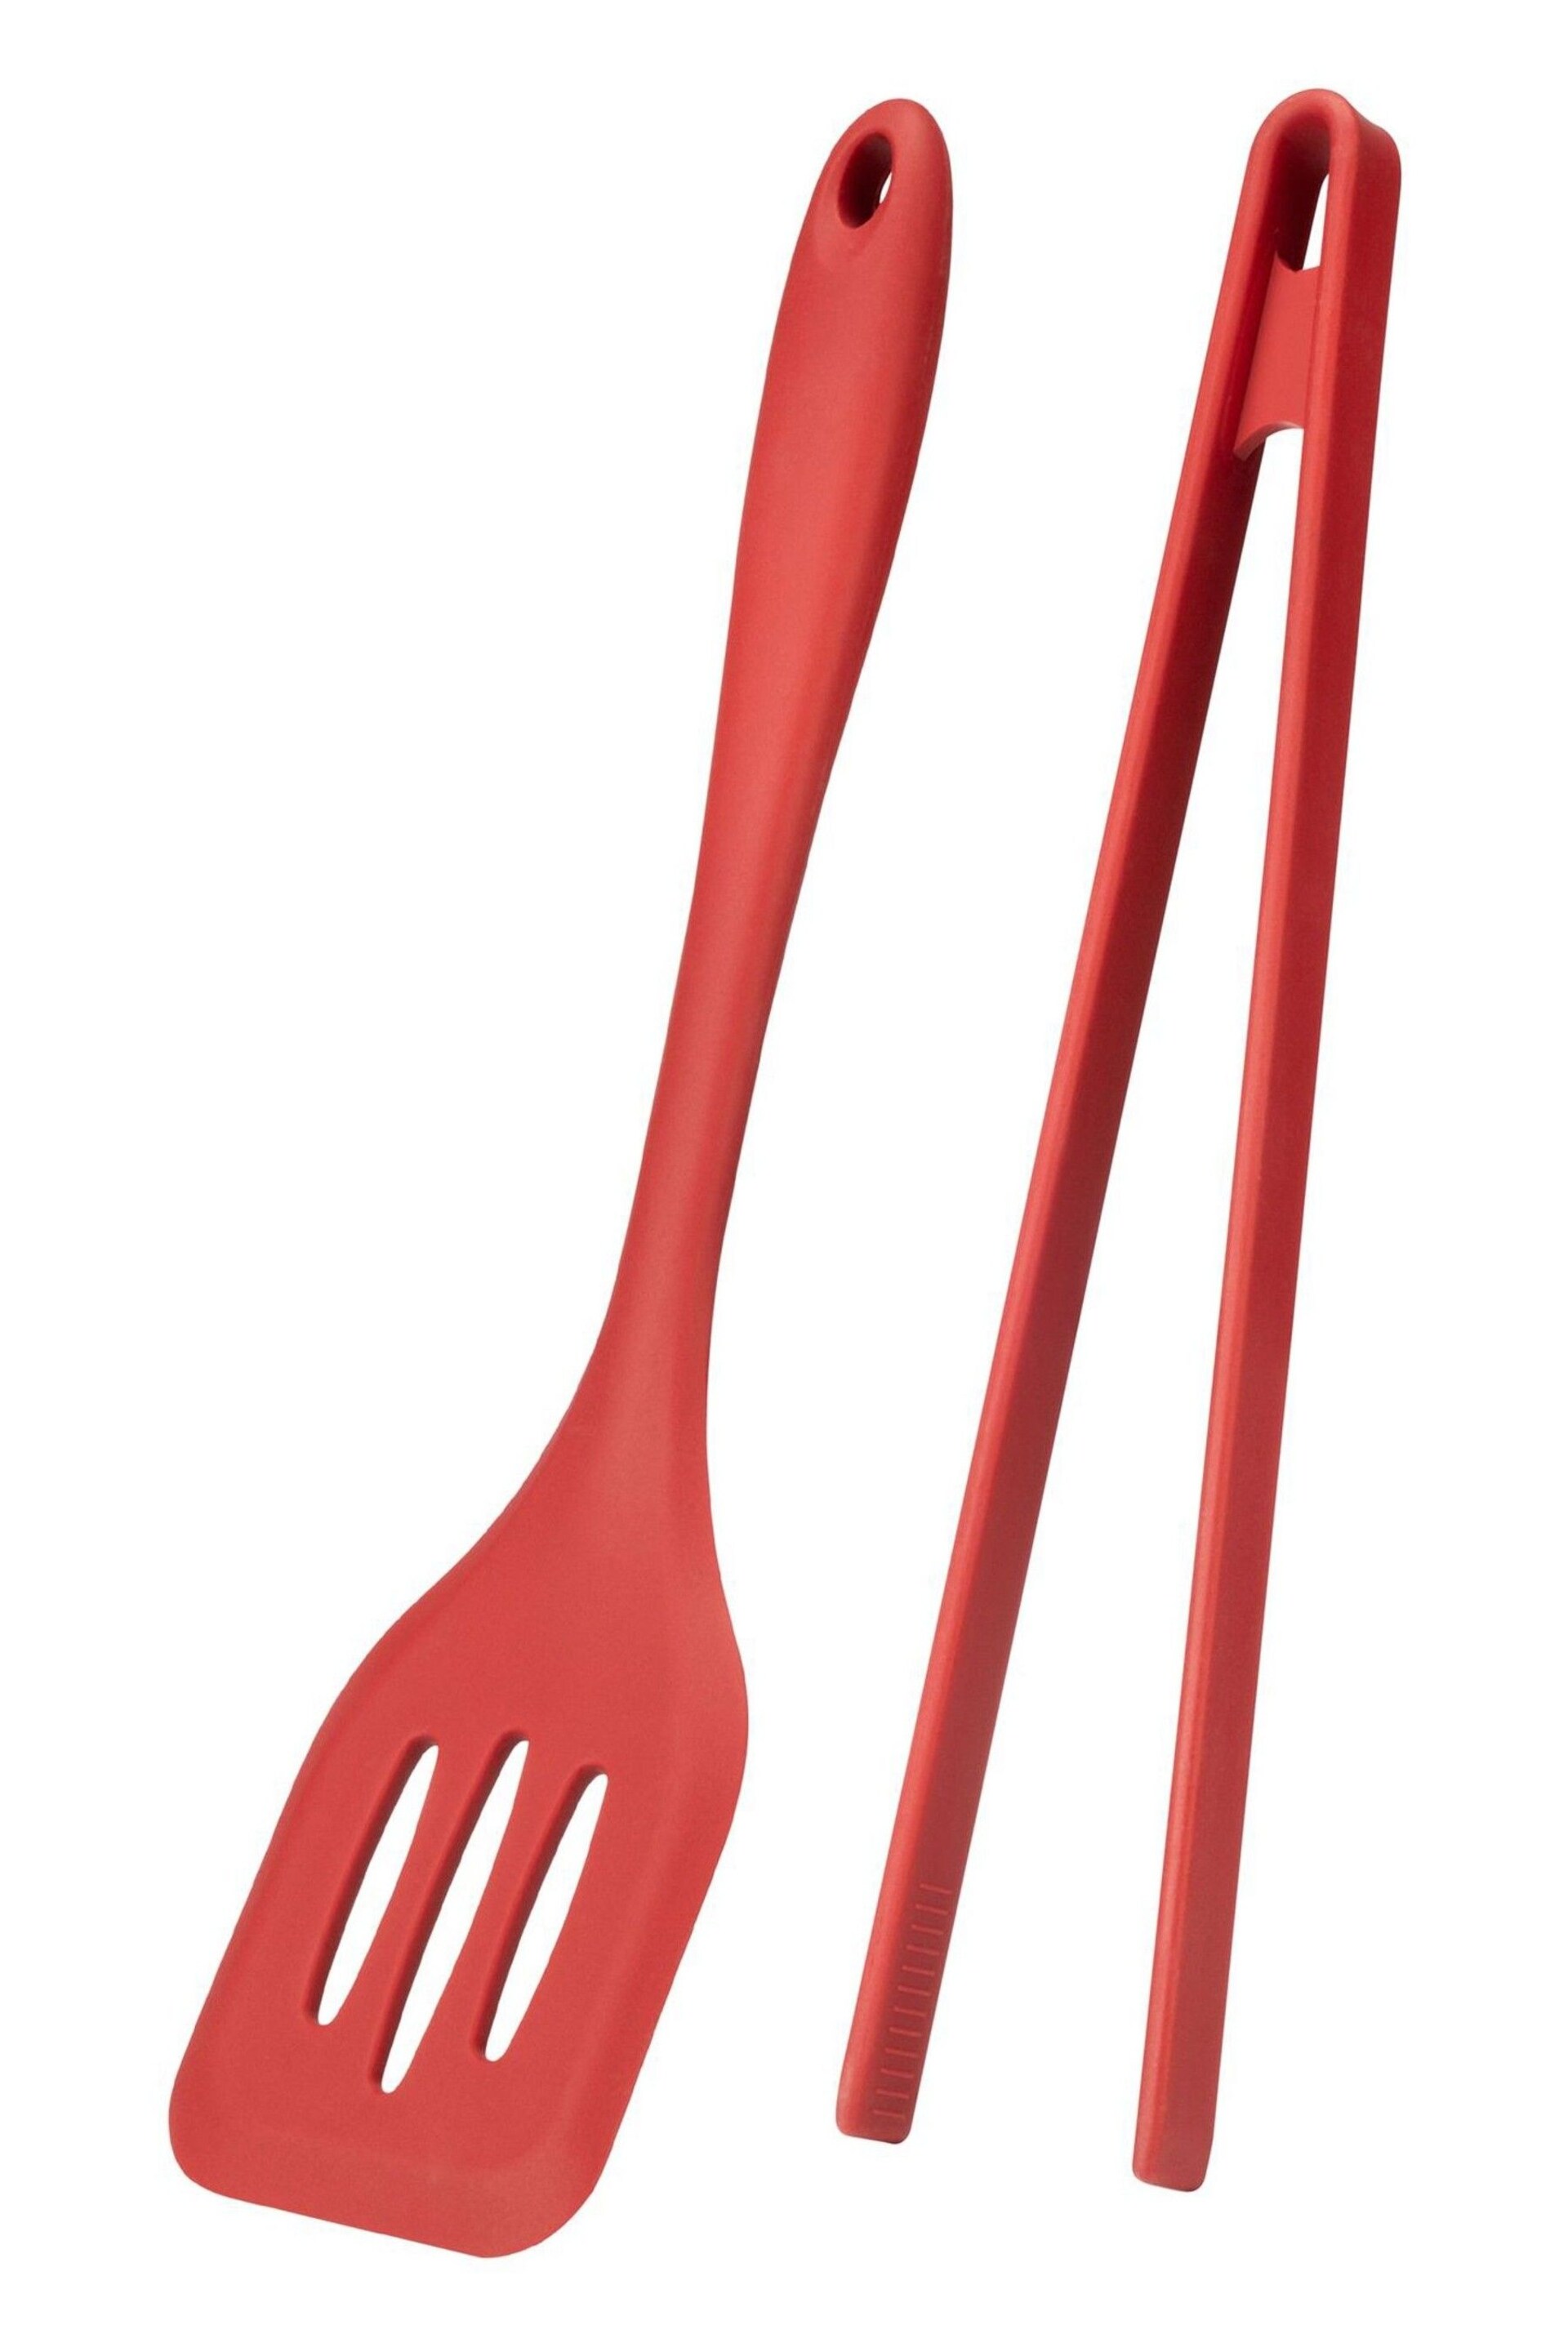 Fusion Red Utensils Set of 5 - Image 4 of 4